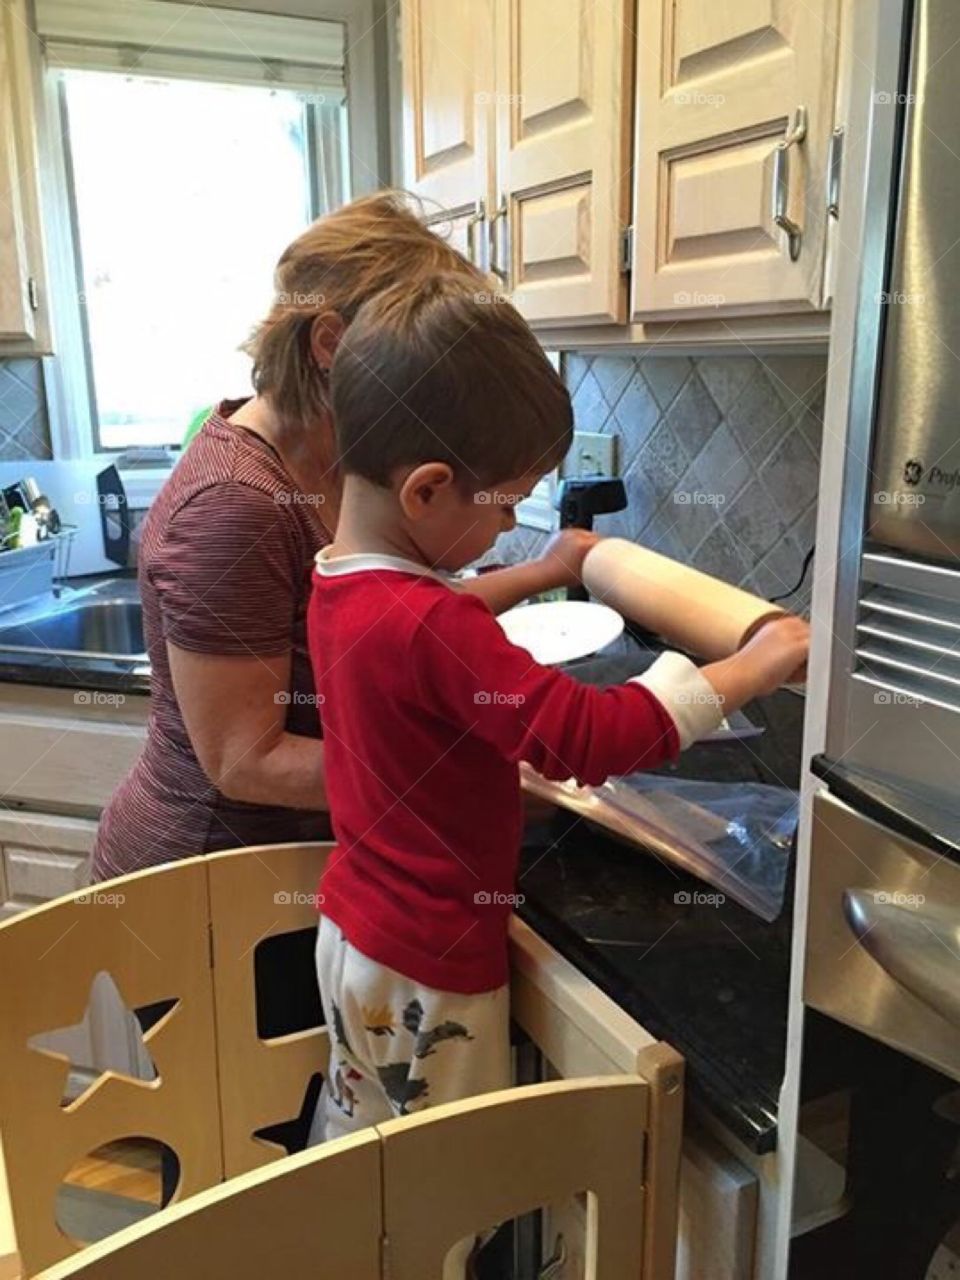 Learning to cook 